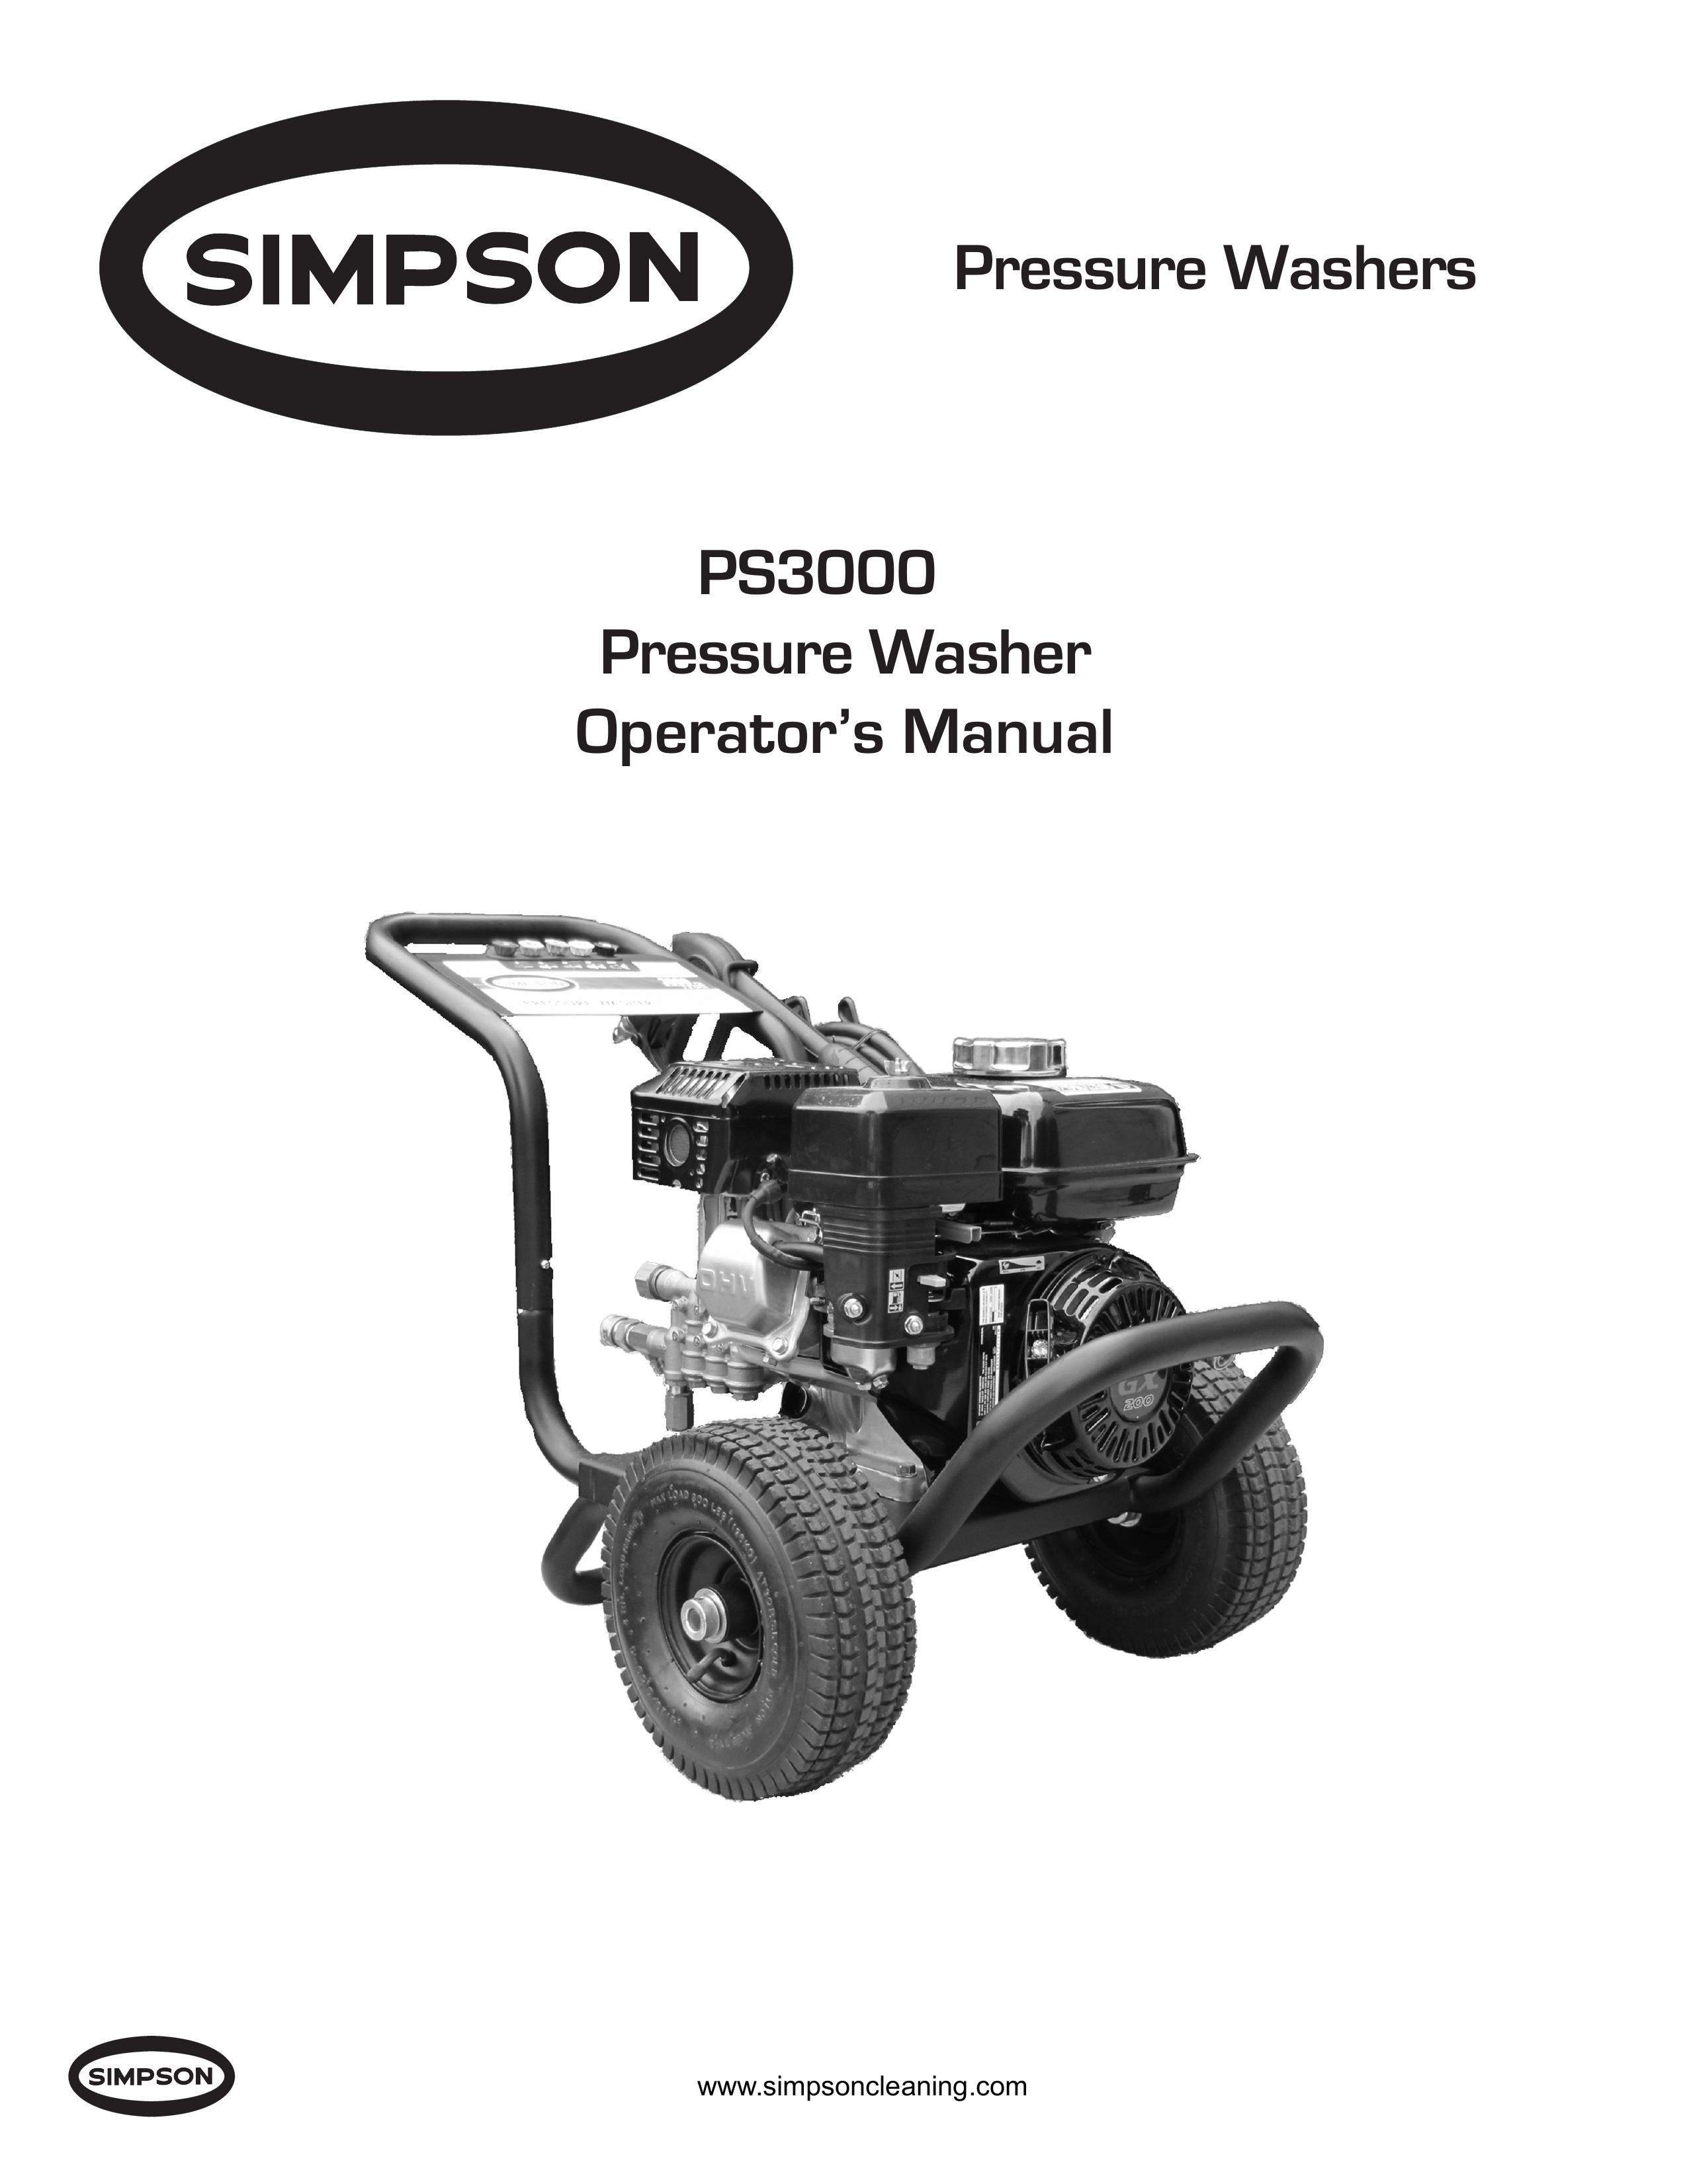 Simpson PS3000 Pressure Washer User Manual